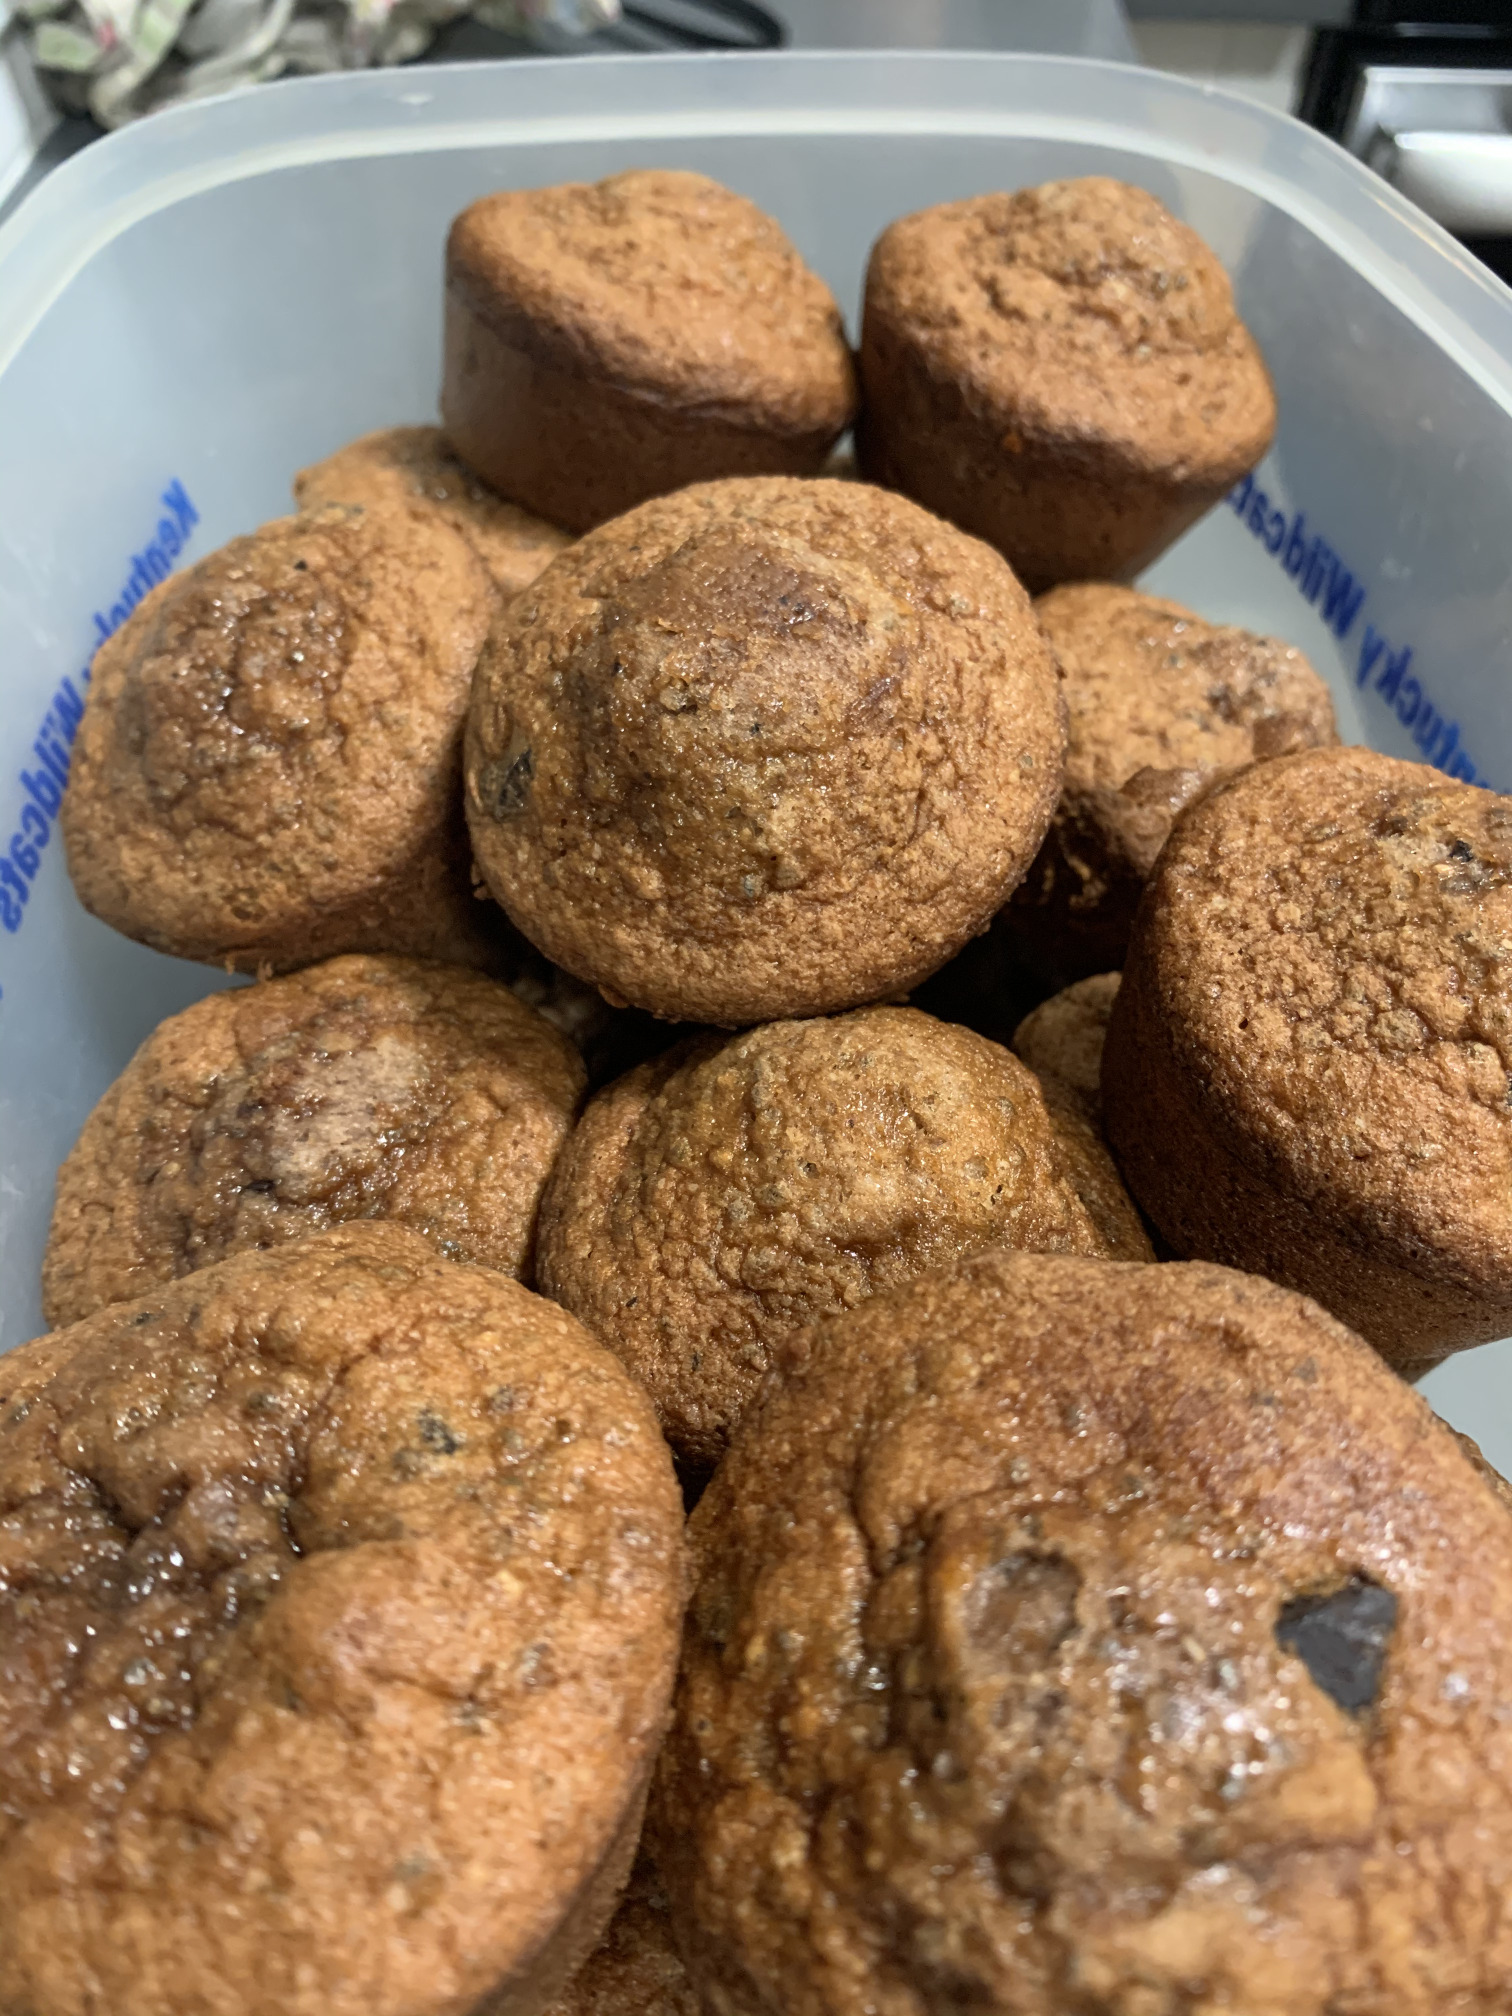 Muffins in a container